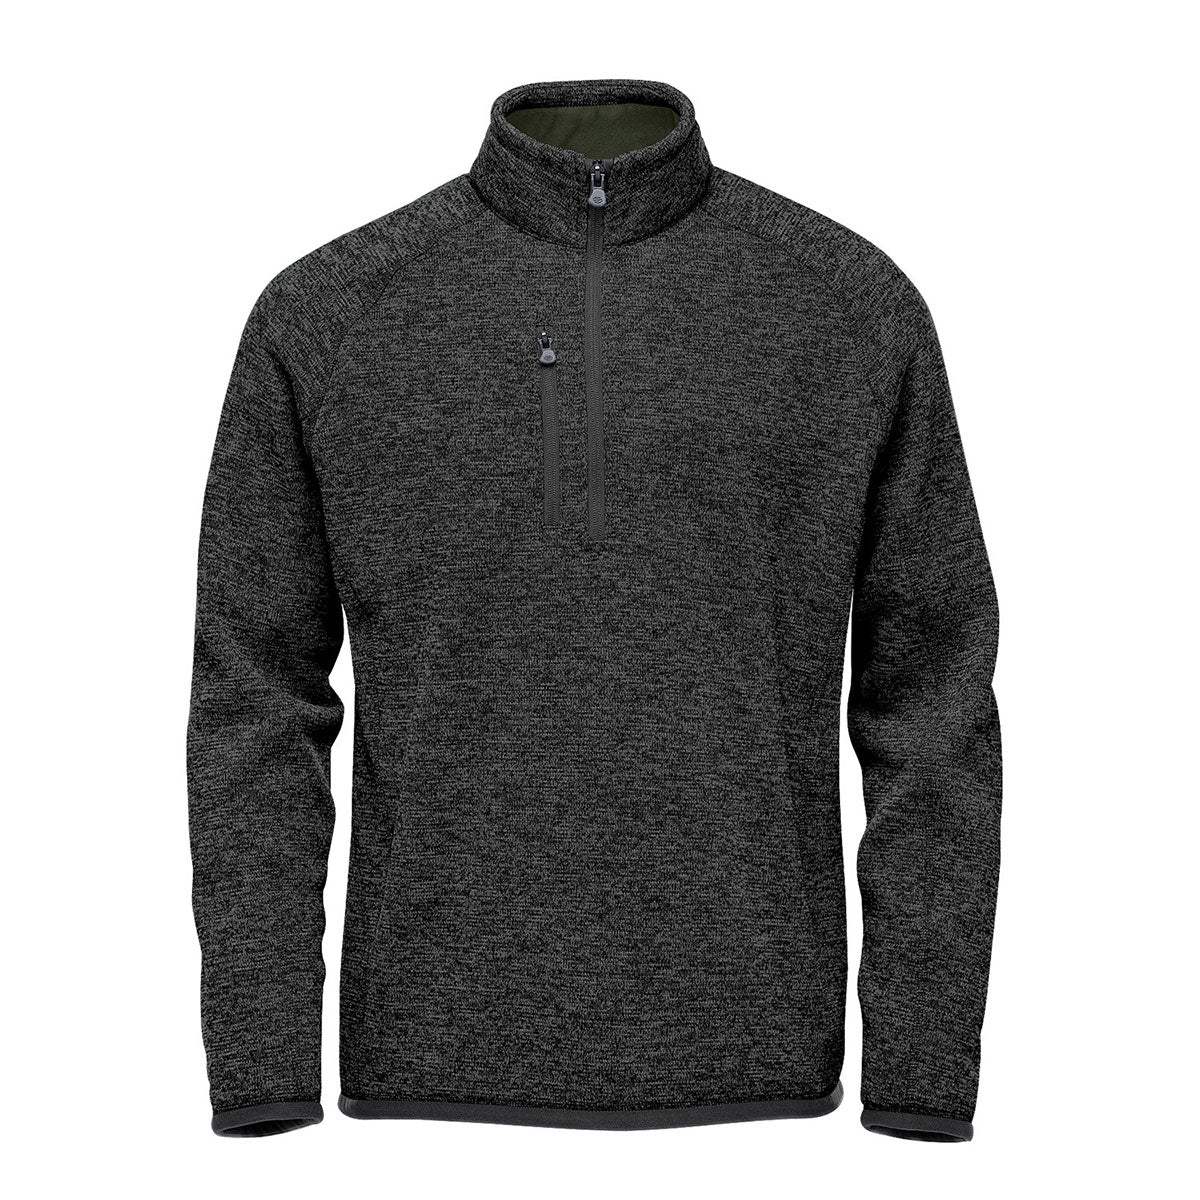 Men’s Avalante 1/4 Zip Pullover by Stormtech - Promotions Only Group Limited